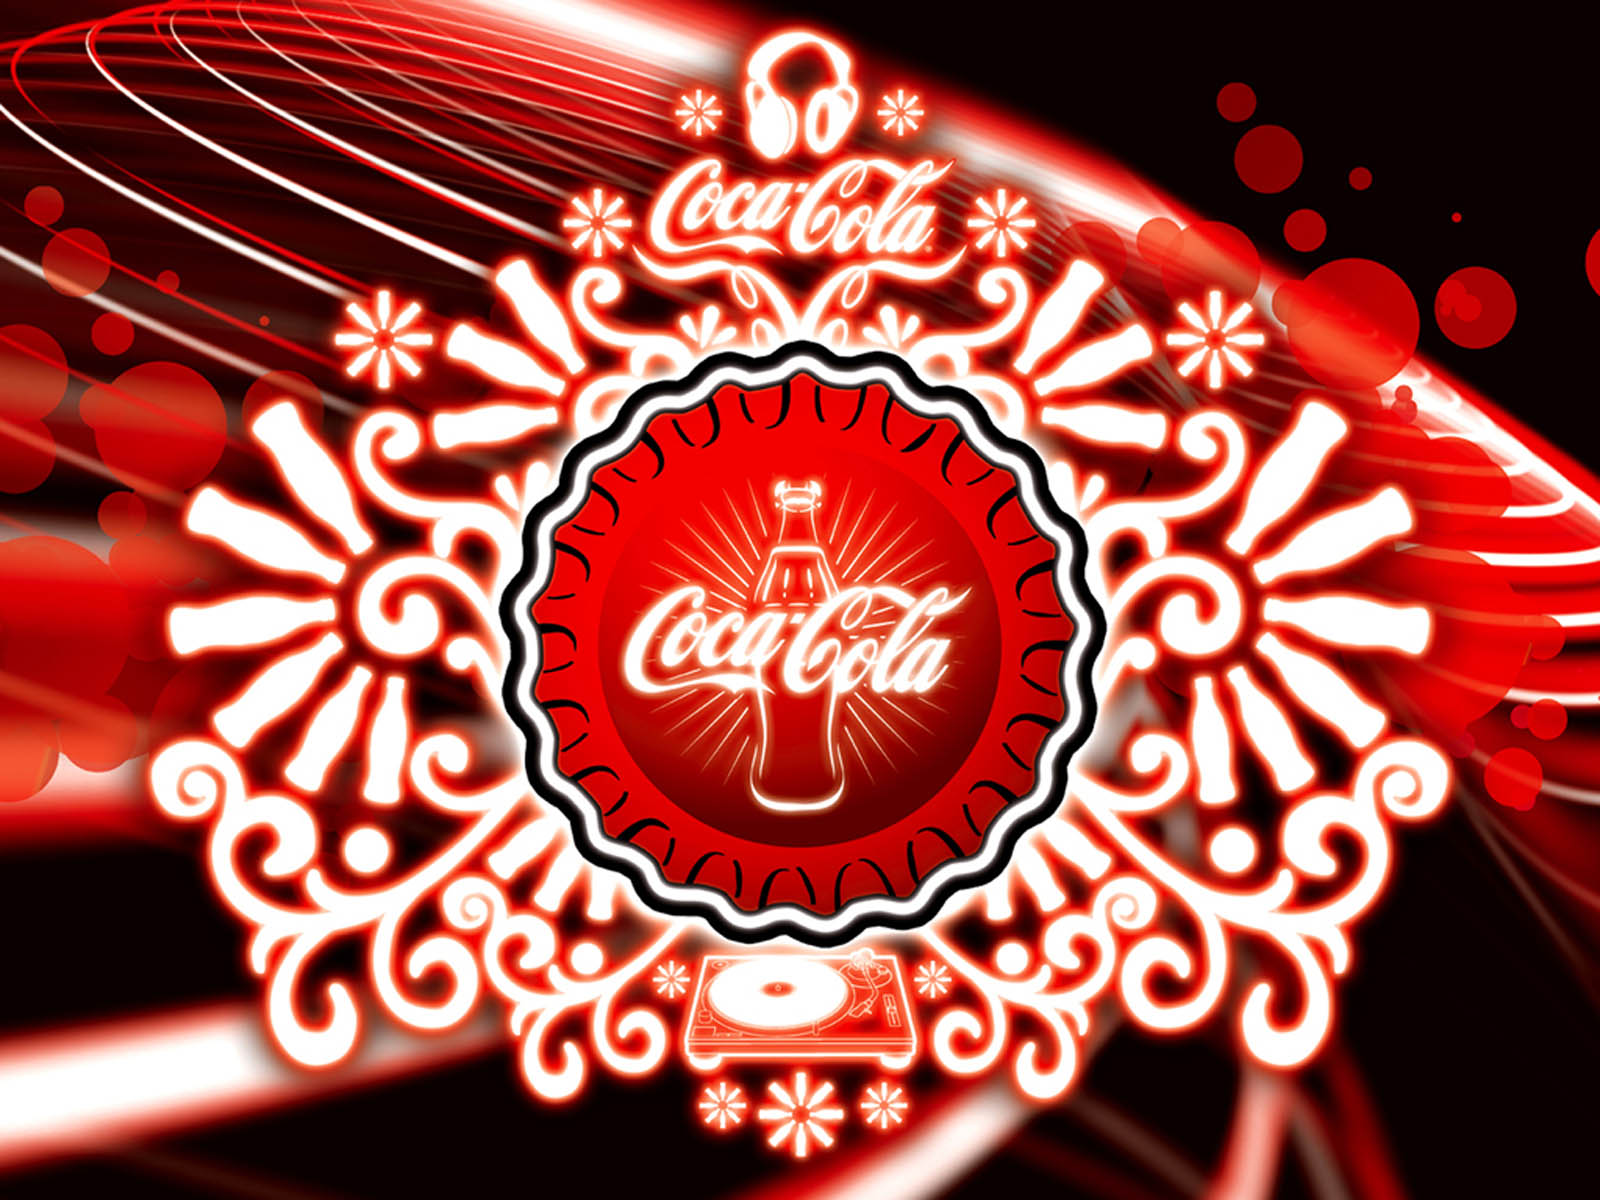 Tag Coca Cola Wallpapers Backgrounds PhotosImages and Pictures for